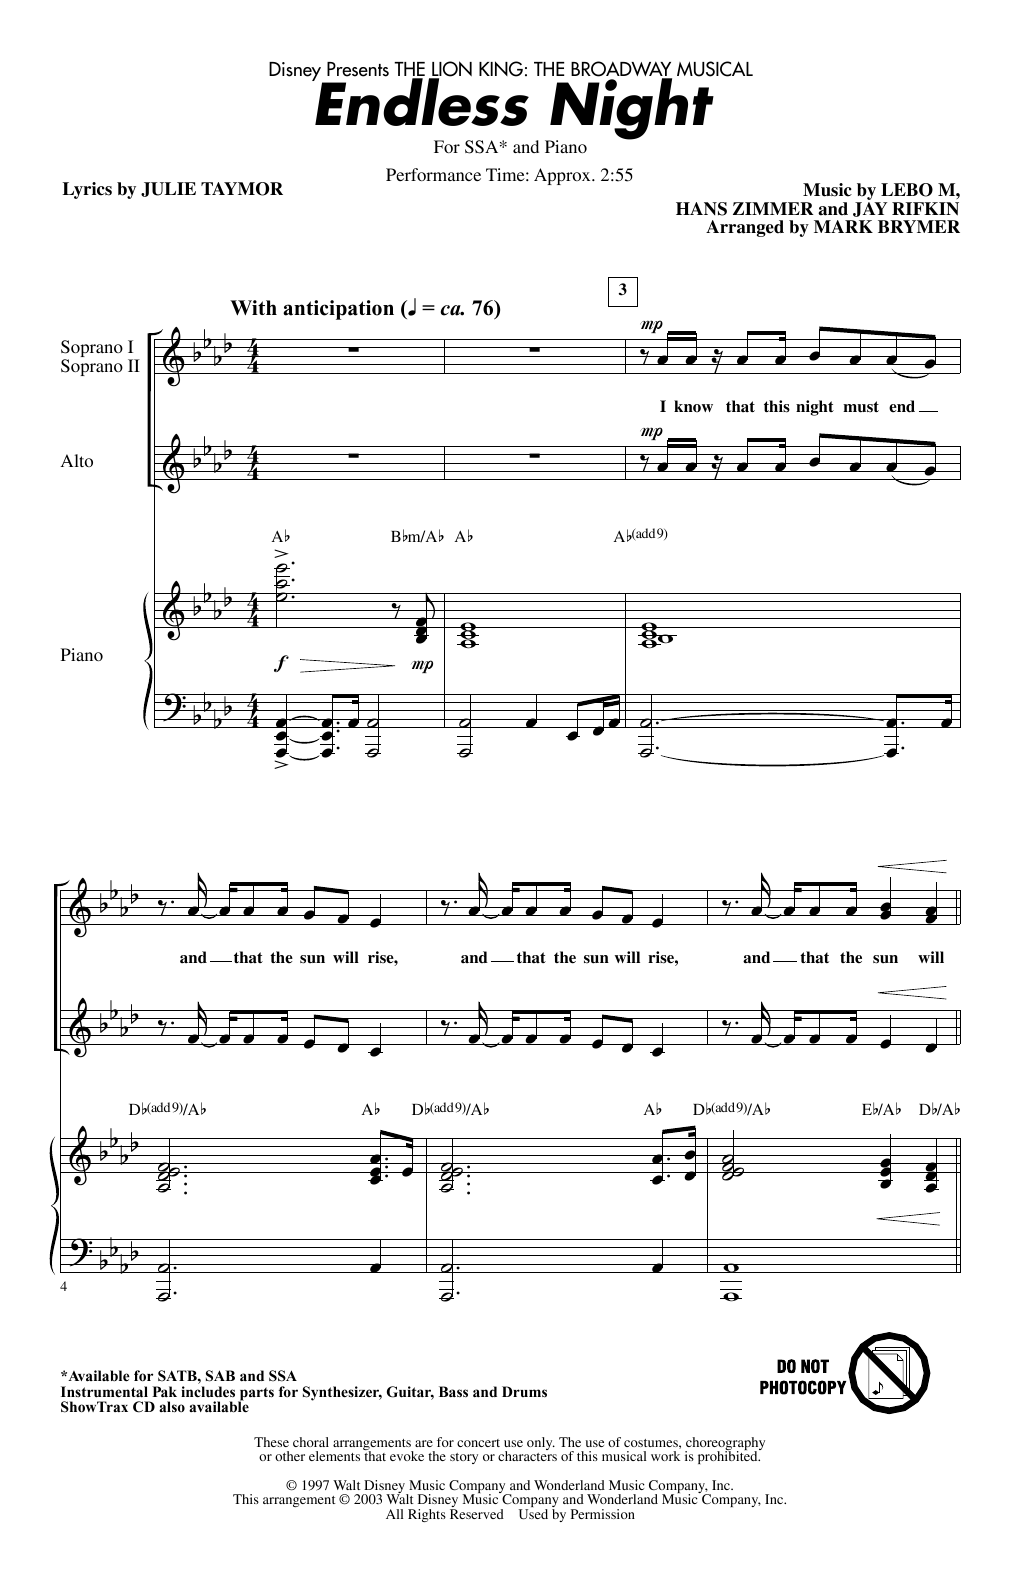 Lebo M., Hans Zimmer, Jay Rifkin and Julie Taymor Endless Night (from The Lion King: Broadway Musical) (arr. Mark Brymer) sheet music notes and chords arranged for SSA Choir